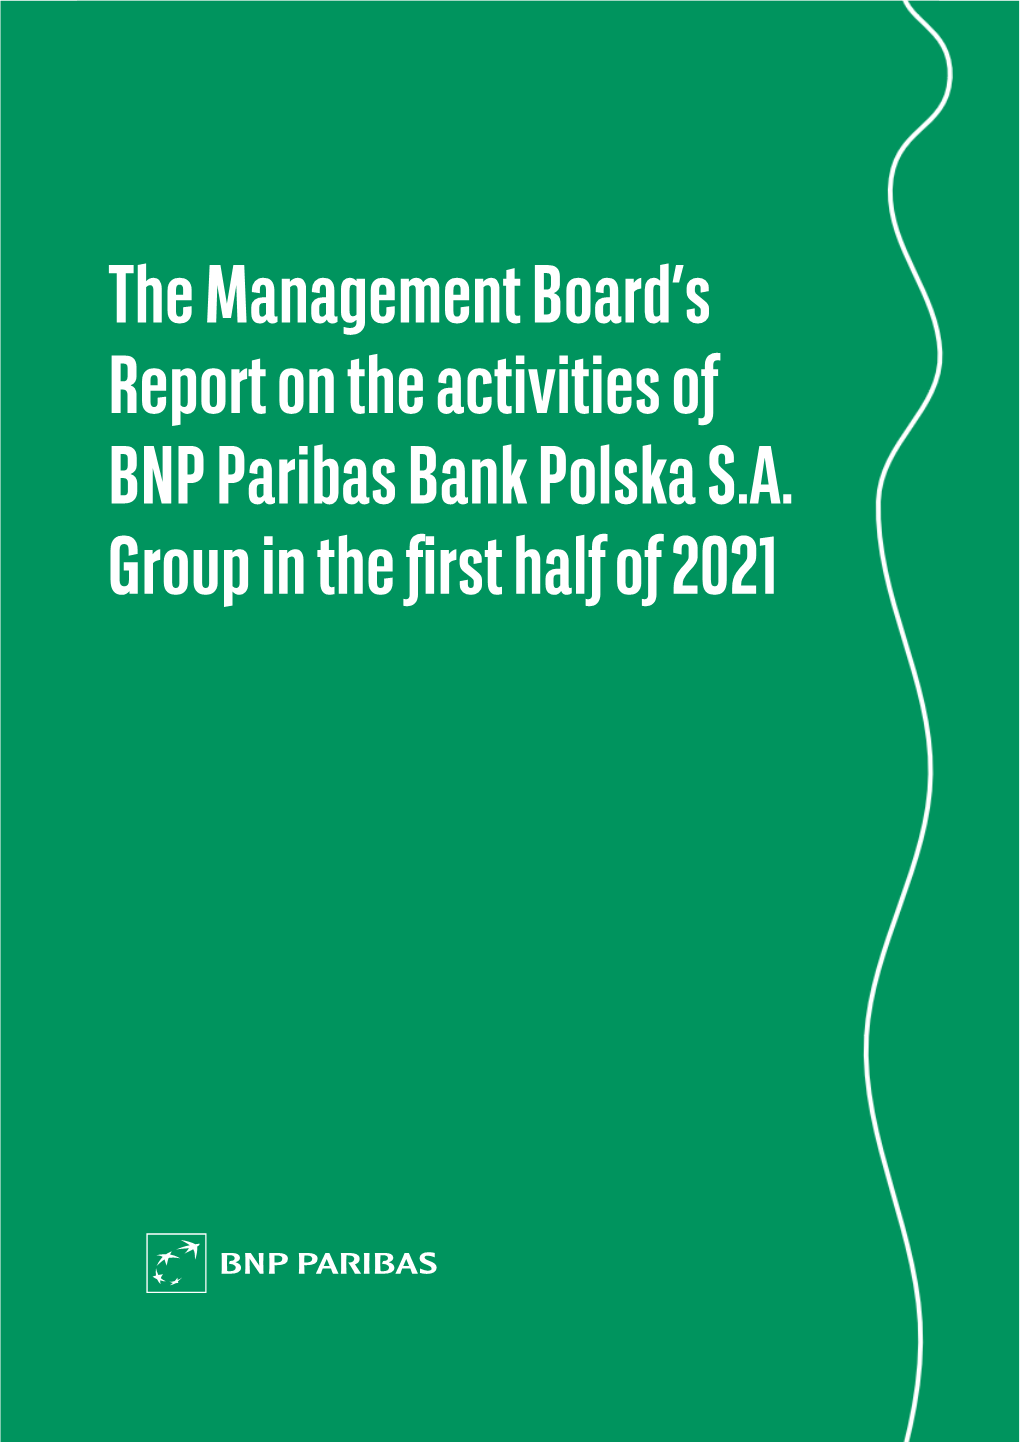 The Management Board's Report on the Activities of BNP Paribas Bank